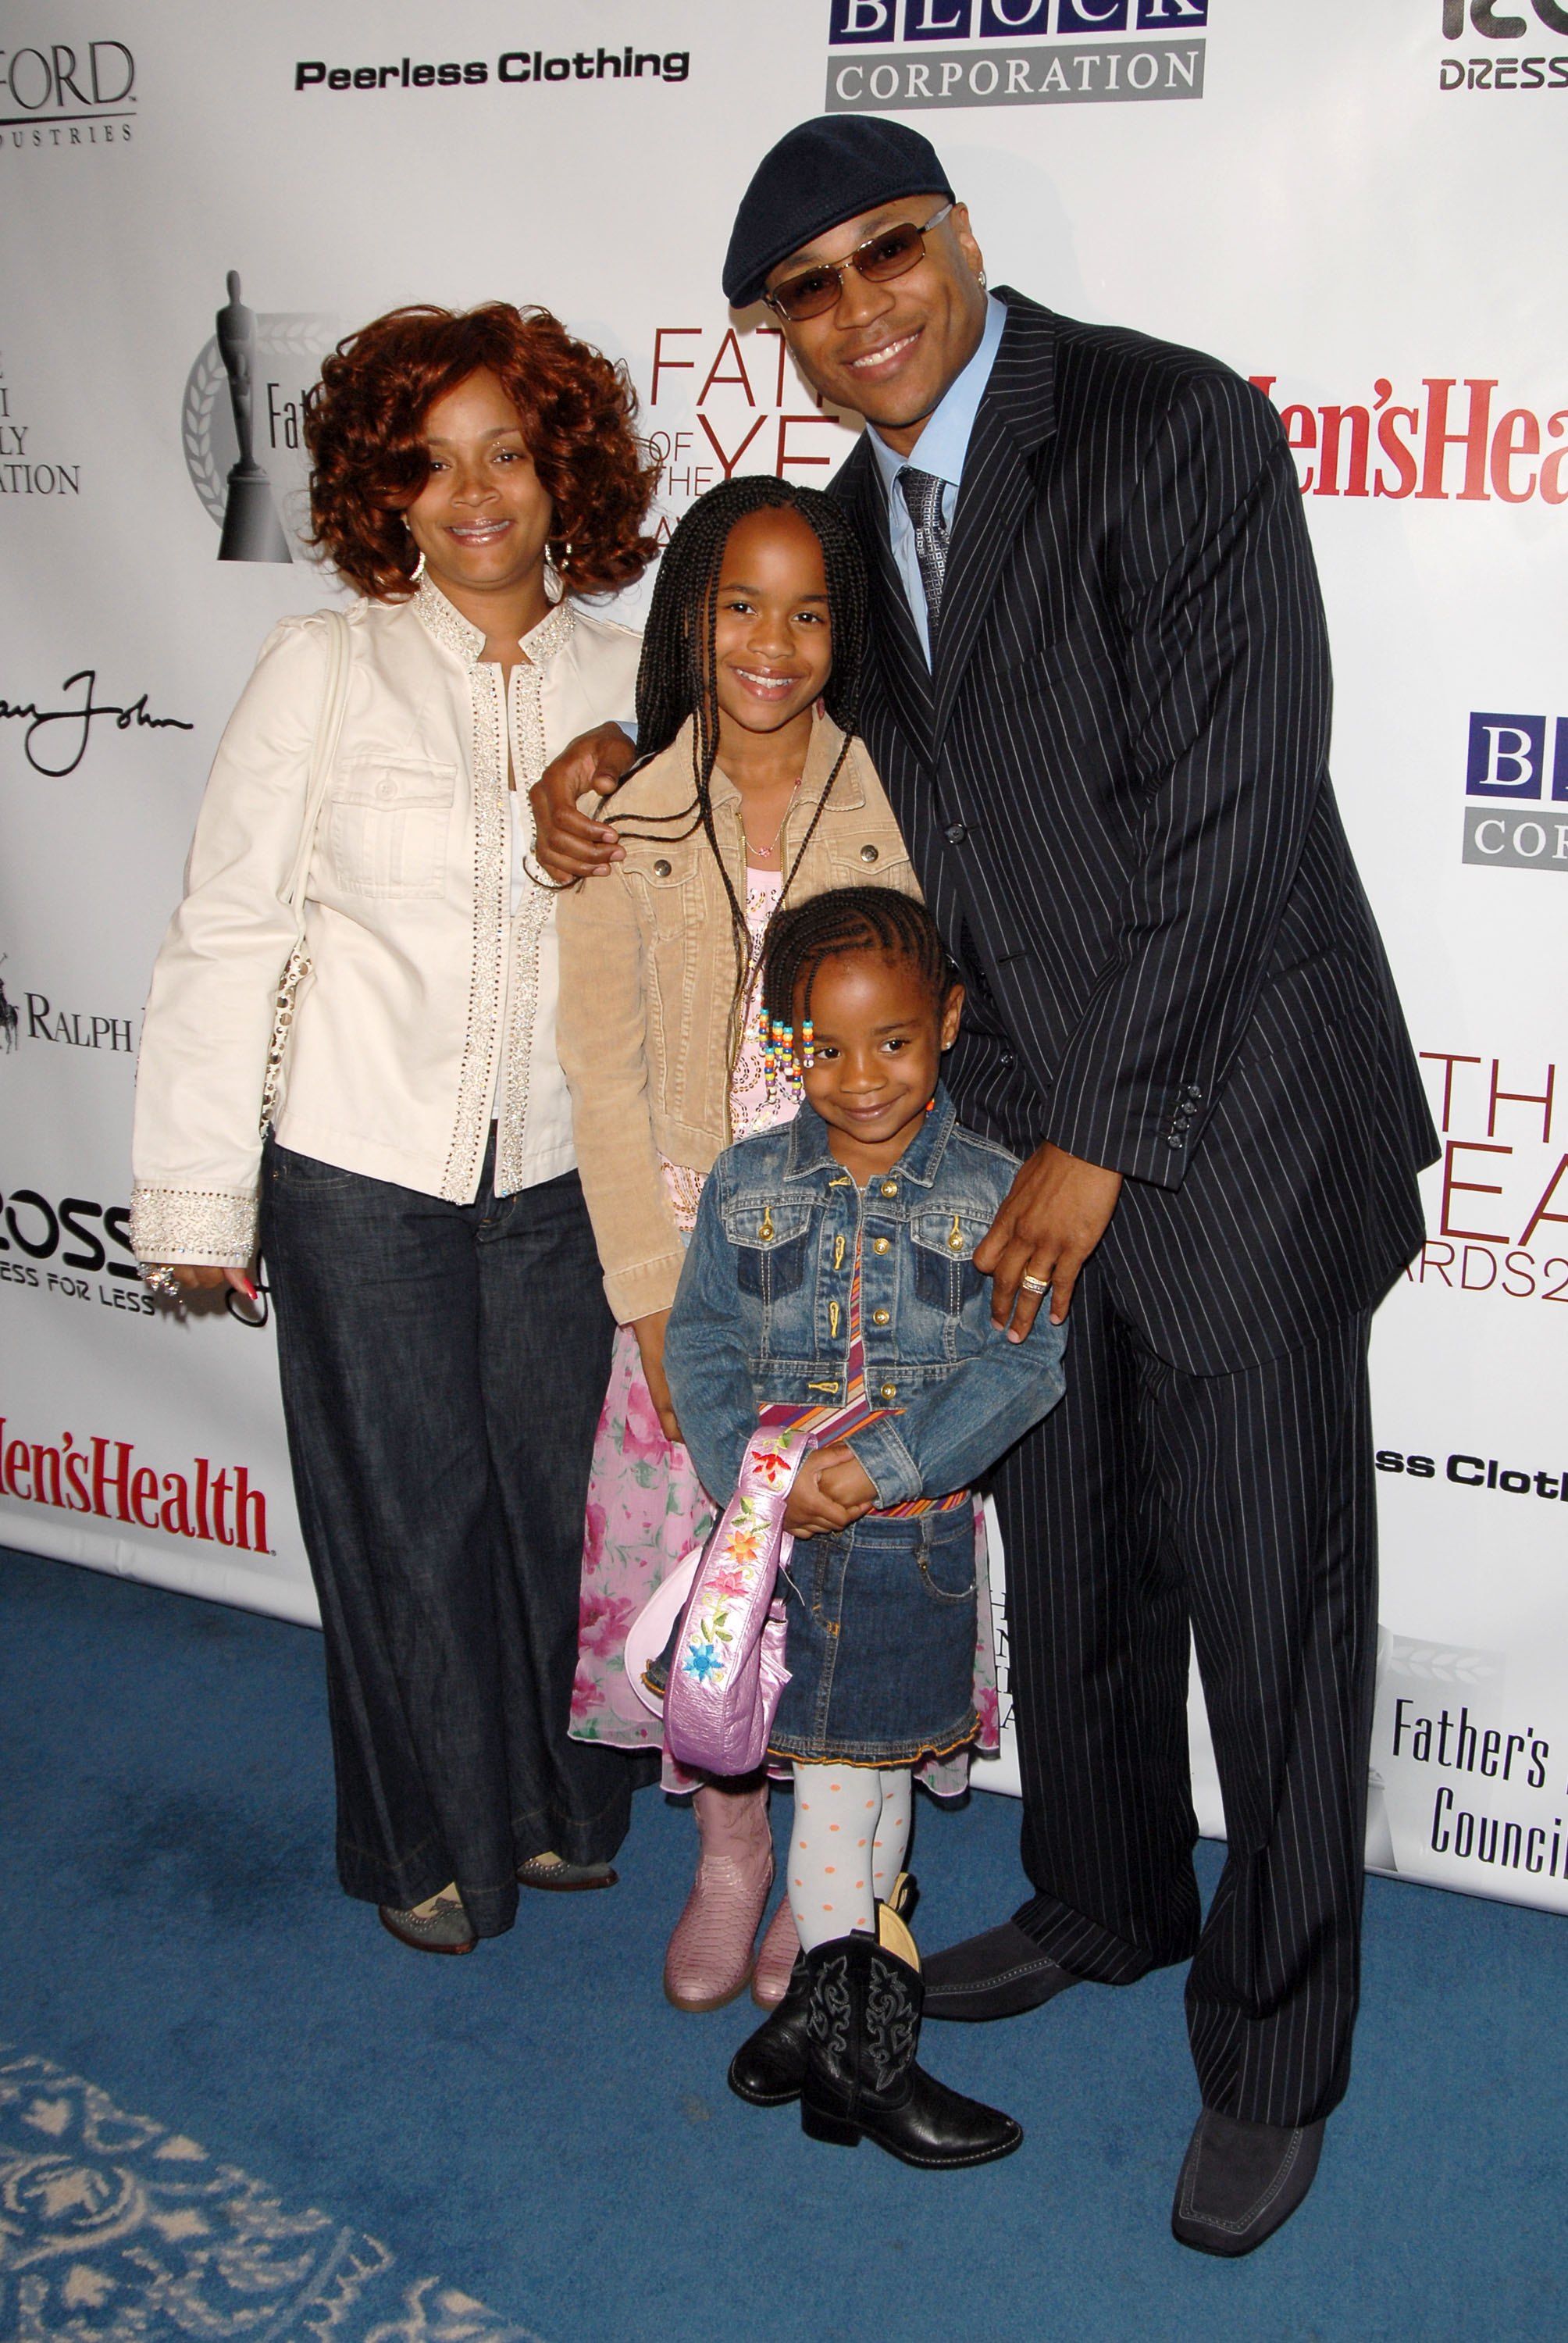 Rapper LL Cool J, Simone Smith, and their children Samaria Smith and Nina Smith at the 65th Annual Father of the Year Awards on June 8, 2006 in New York | Source: Getty Images